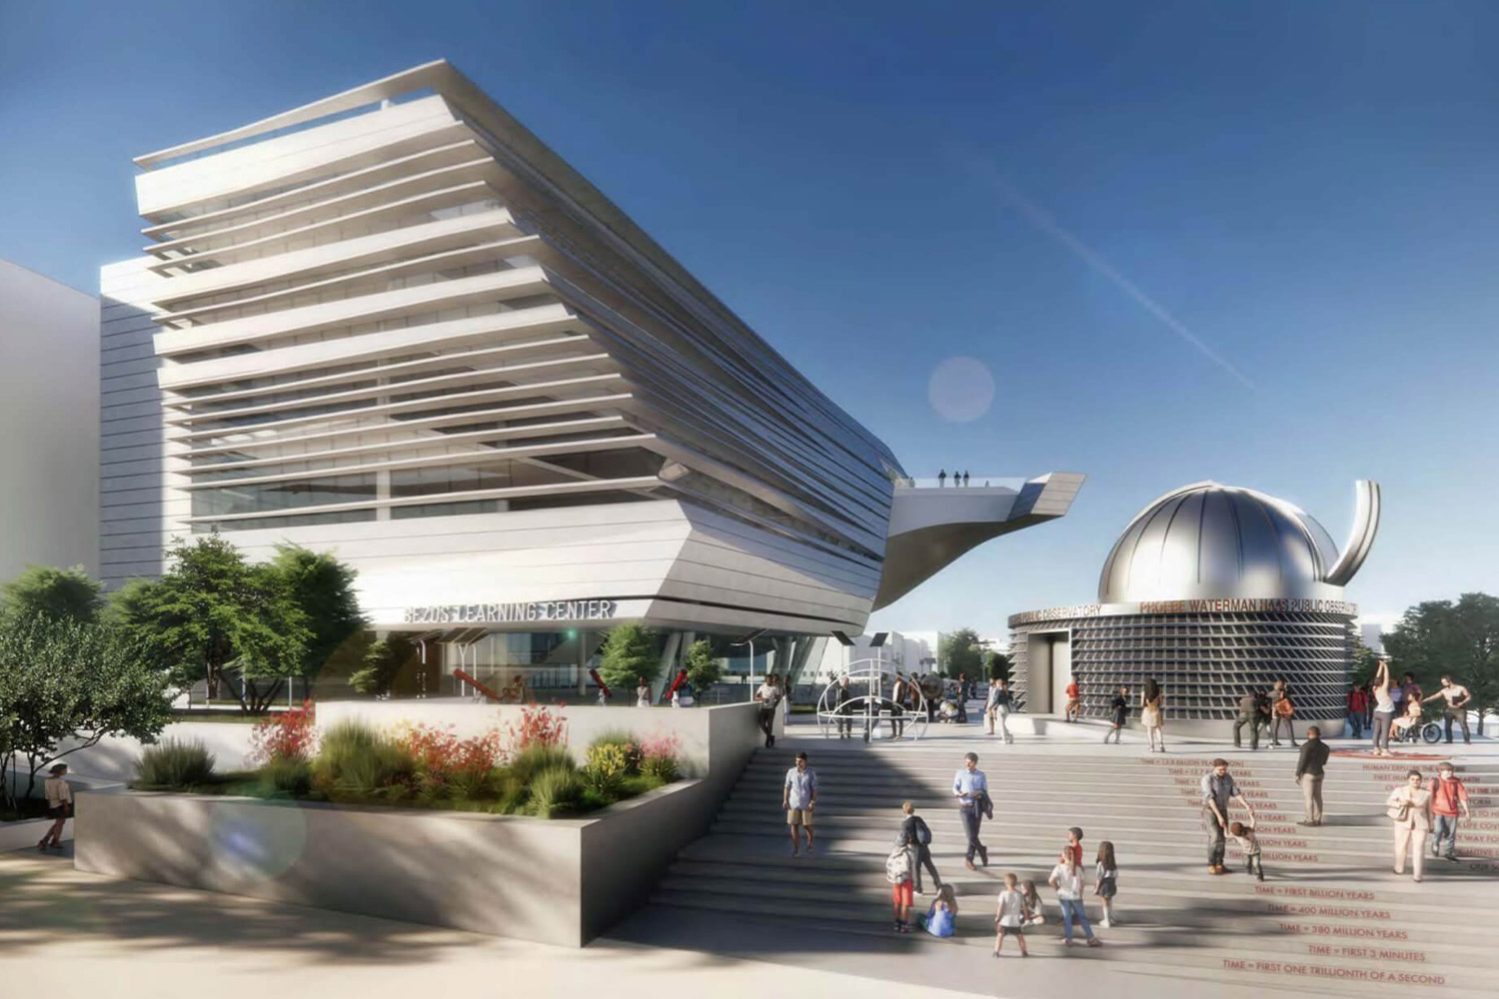 smithsonian-reveals-the-design-proposals-for-the-bezos-learning-center_firm-cover